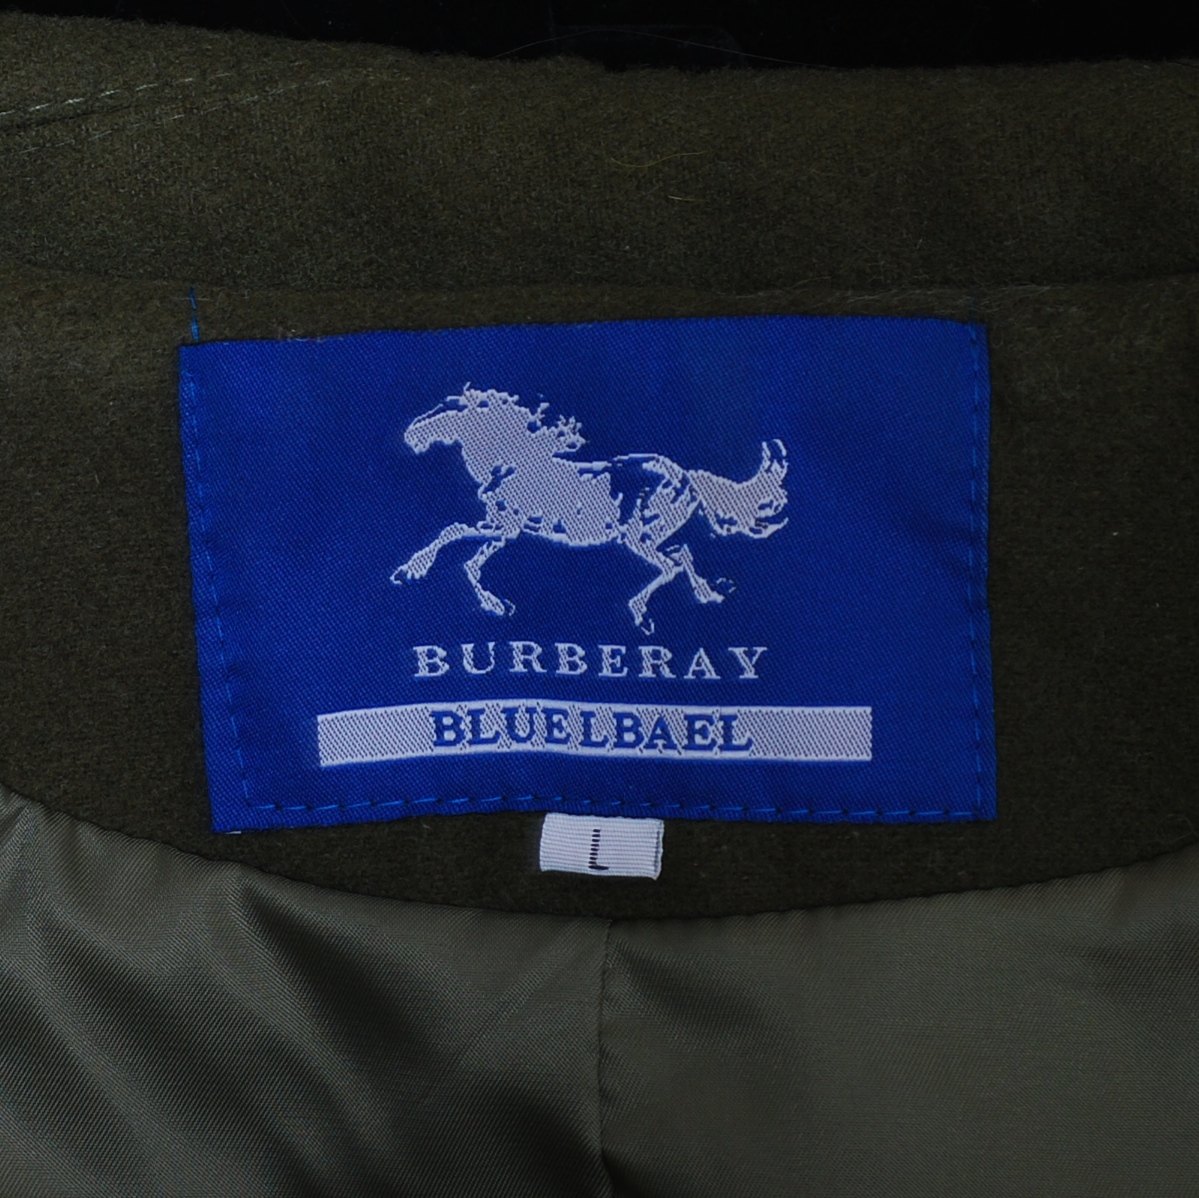 Burberry Blue Label Late 1990's Double Breasted Wool Coat – Japan 